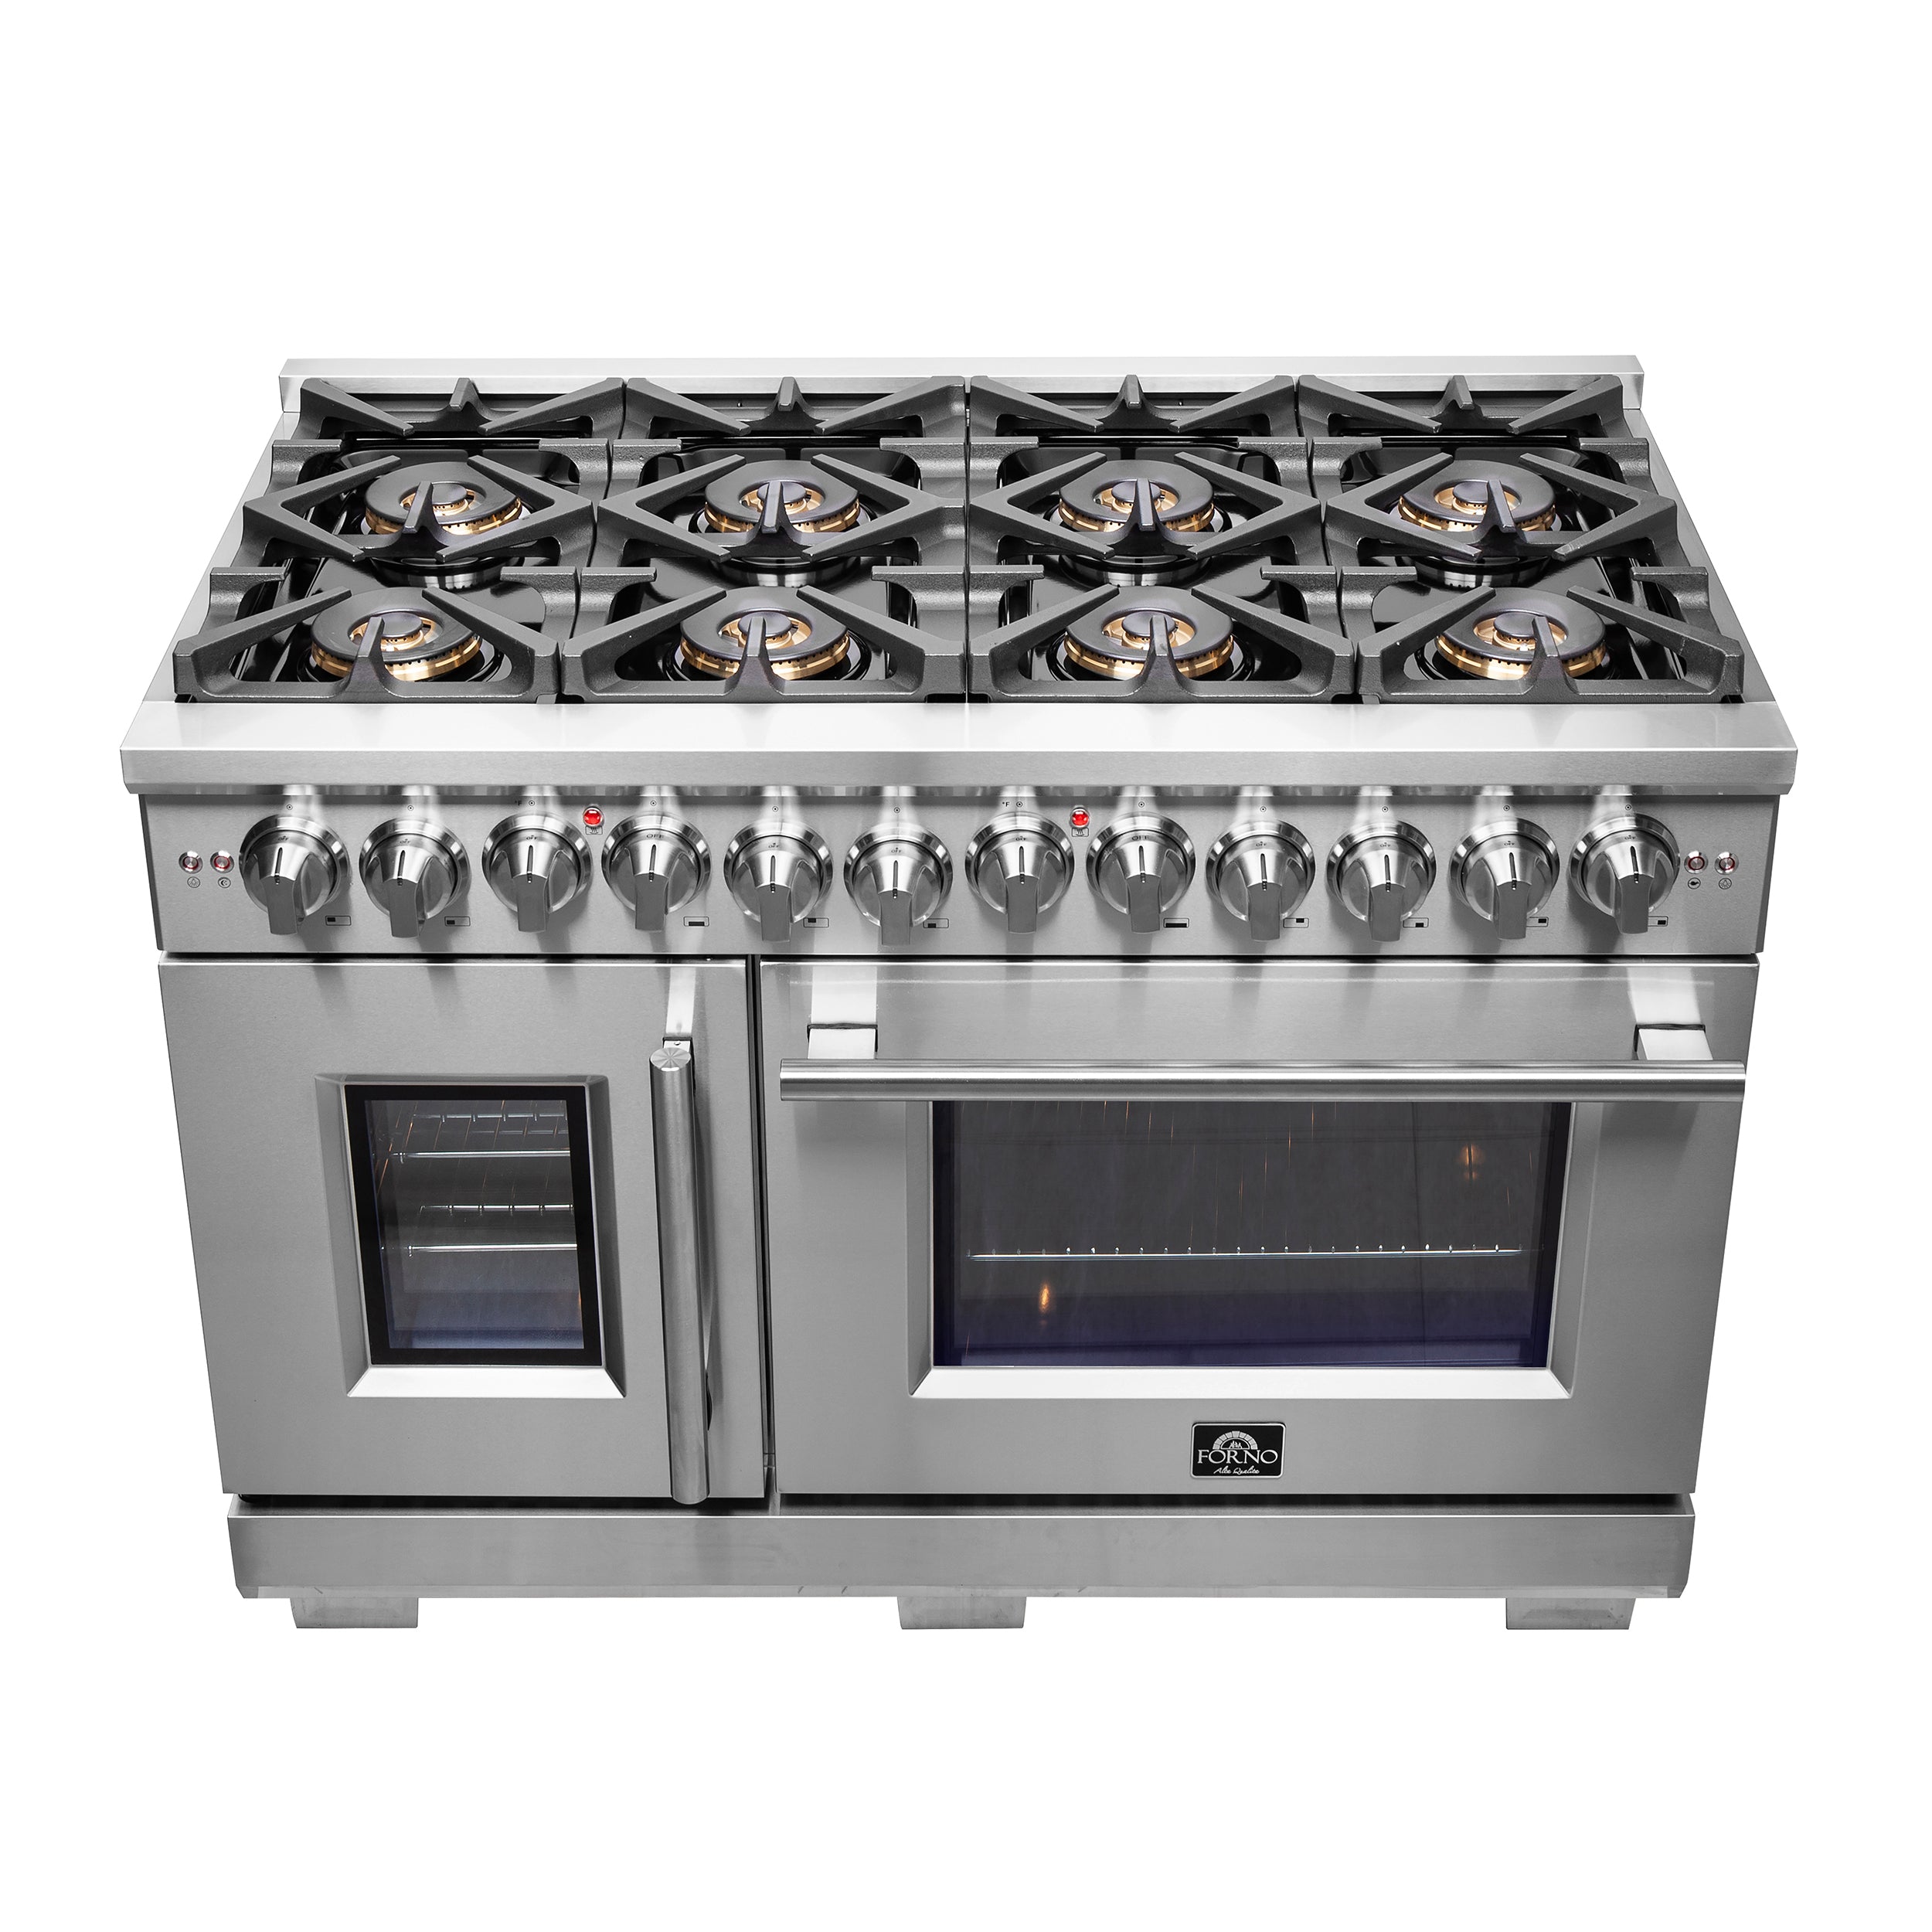 Forno Capriasca 48 in. 6.58 cu. ft. Left Swing Door Freestanding Dual Fuel Range with Gas Stove and Electric Oven in Stainless Steel (FFSGS6387-48)